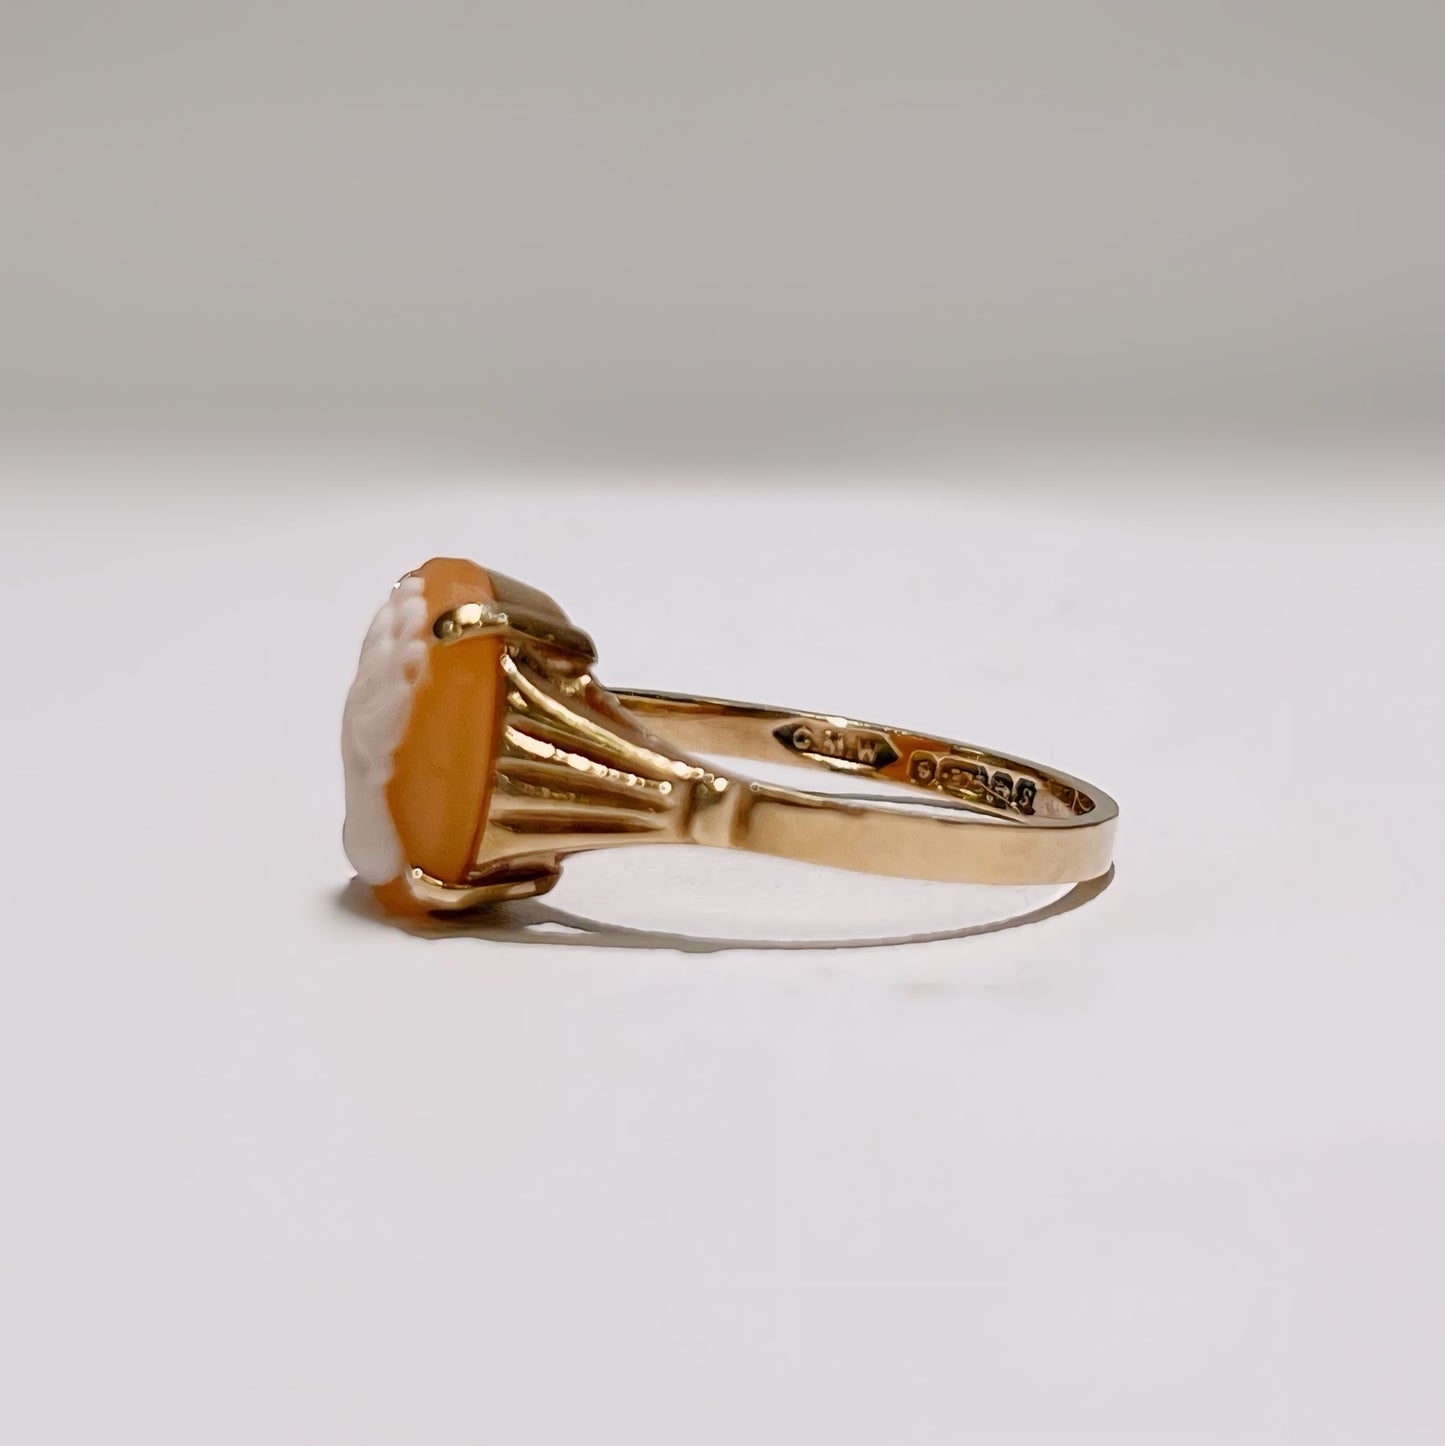 Vintage 1960s 9ct Yellow Gold Cameo Ring - Size L1/2